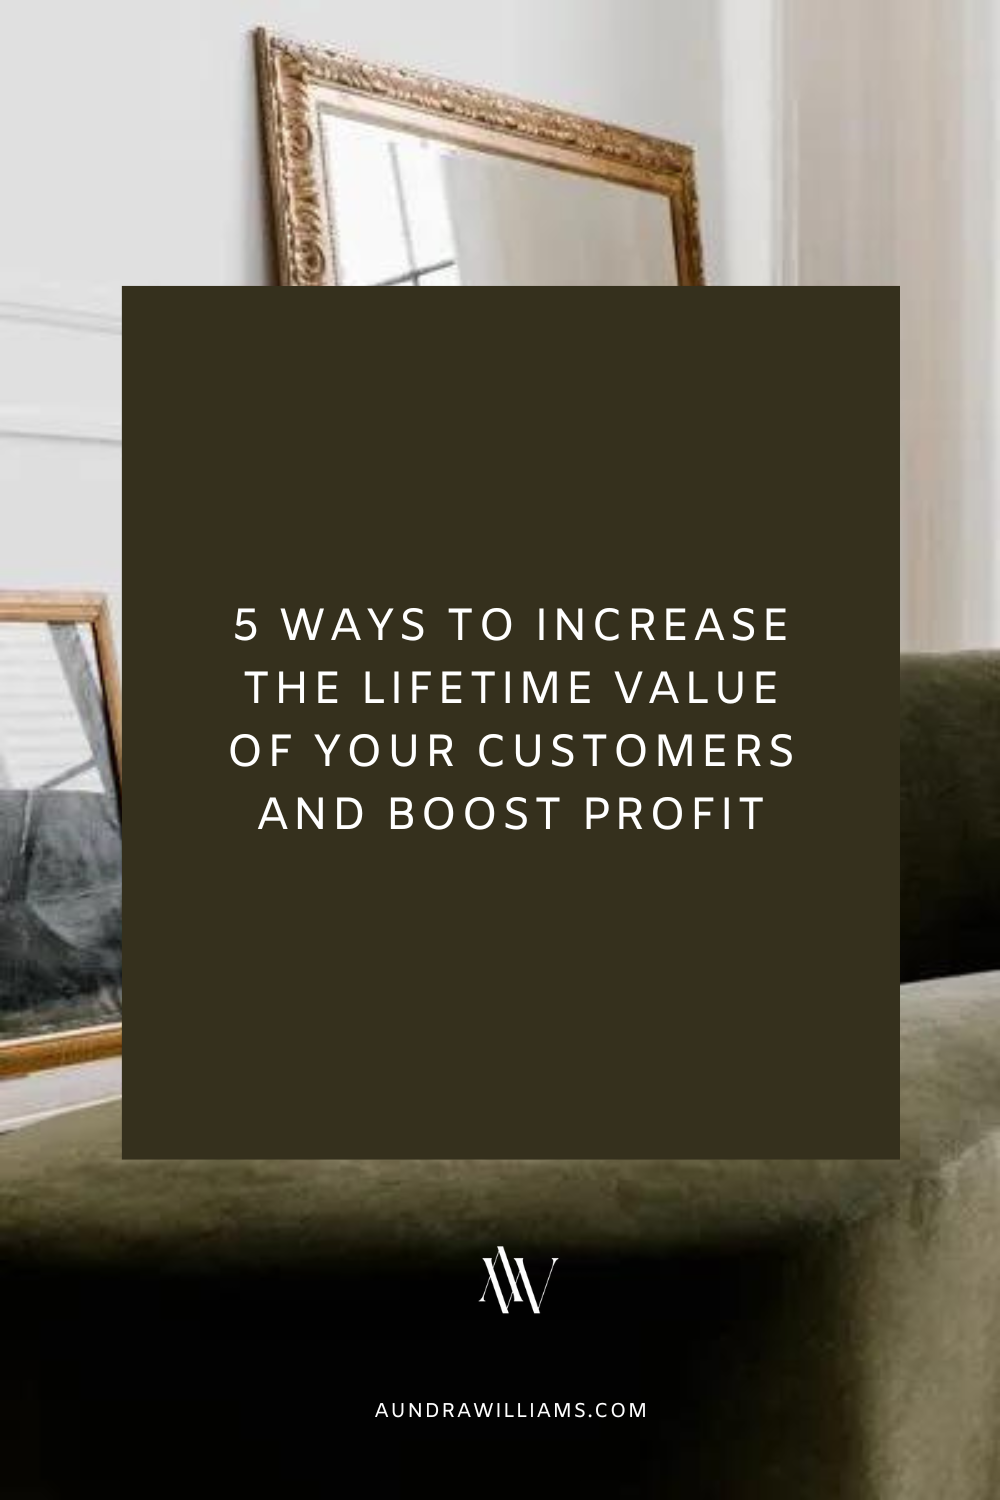 5 WAYS TO INCREASE THE LIFETIME VALUE OF YOUR CUSTOMERS AND BOOST PROFIT